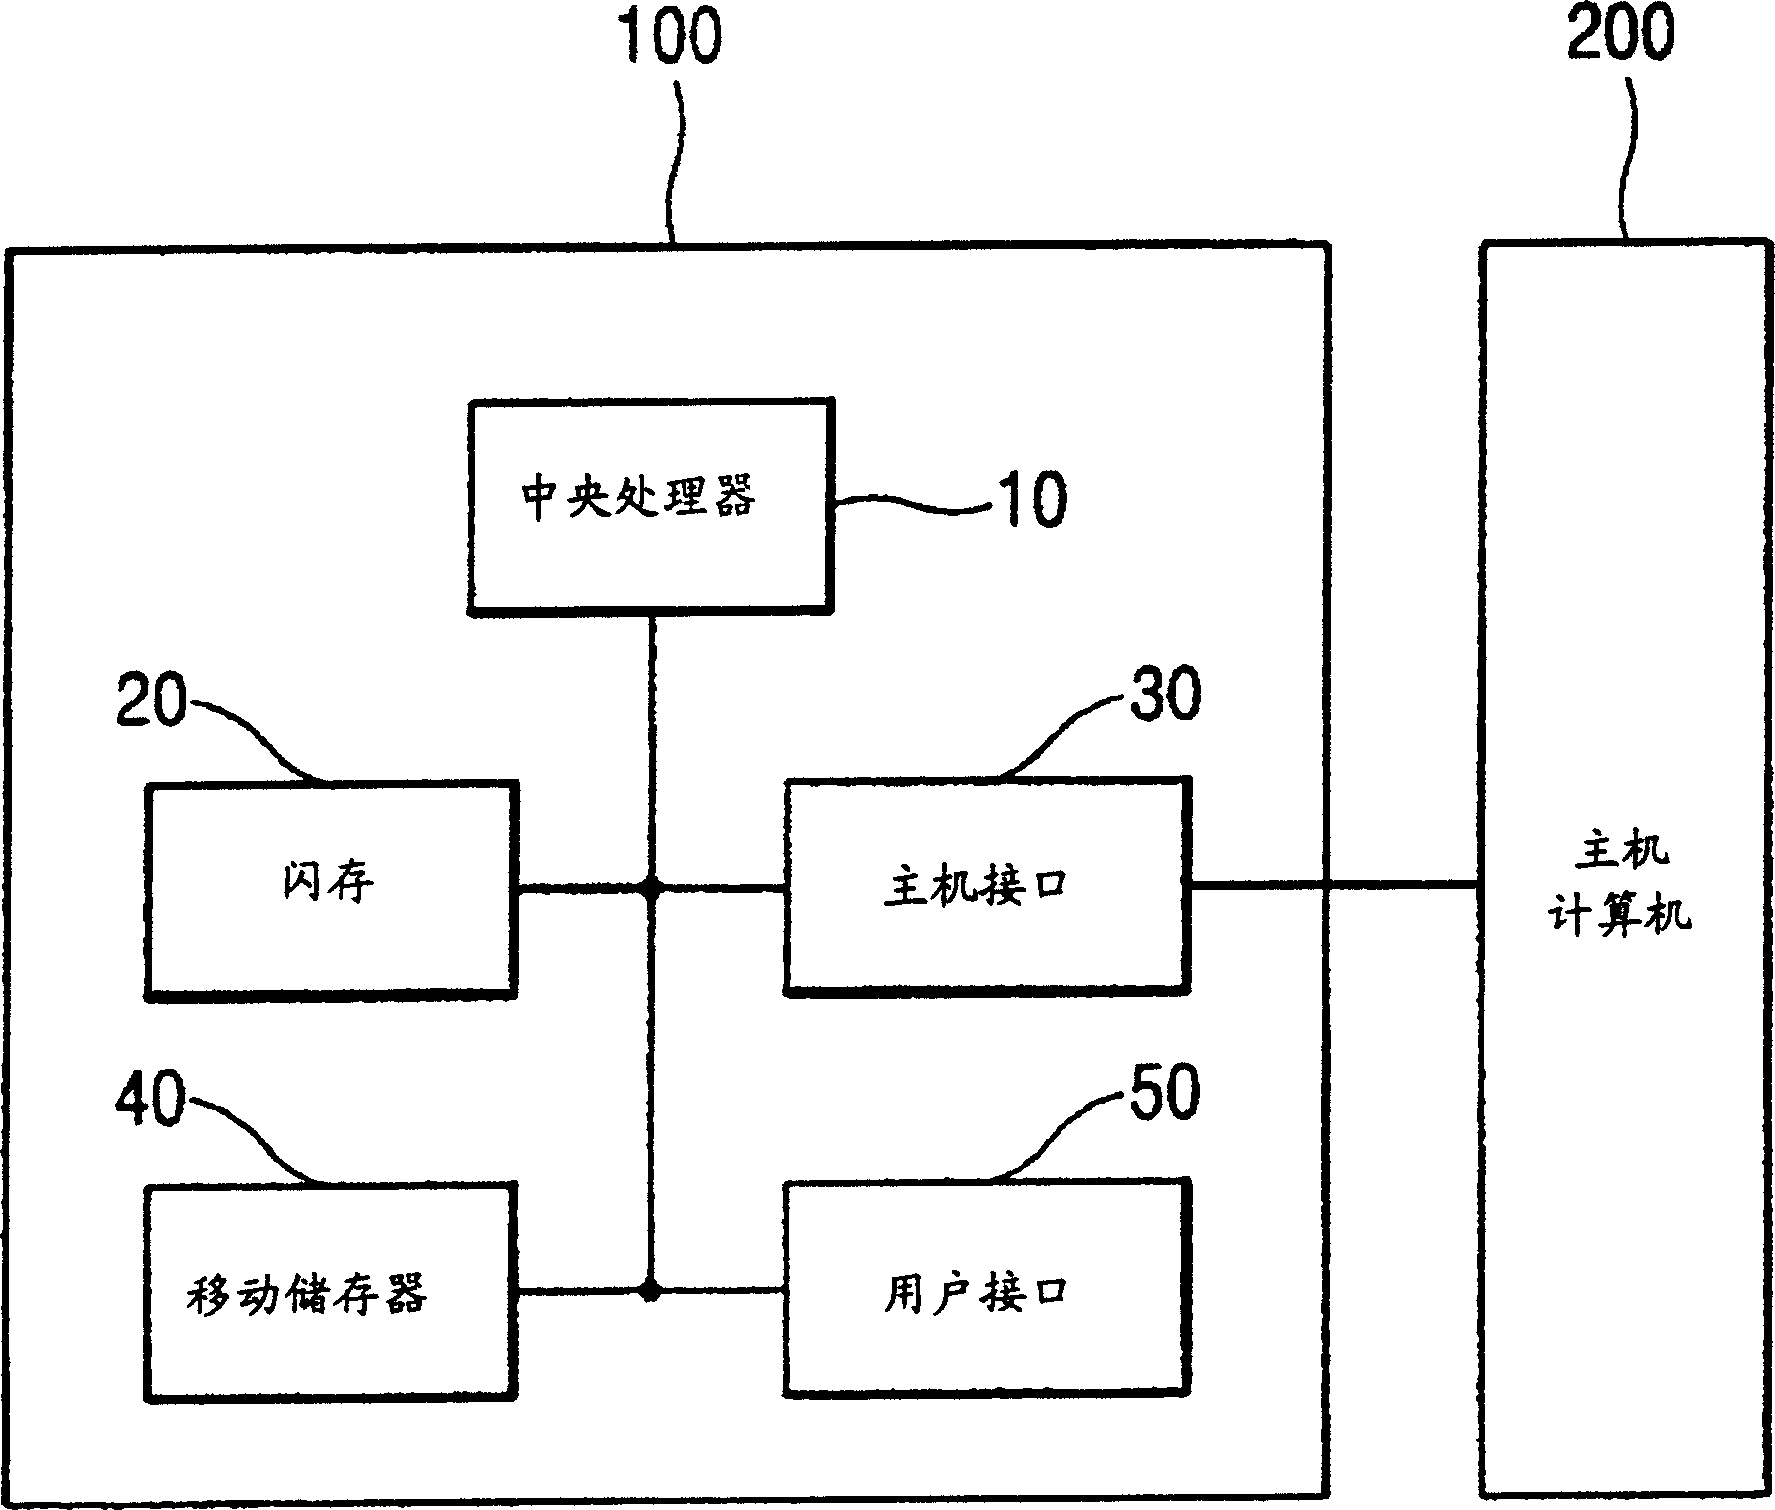 Portable information terminal and method for starting its operation system